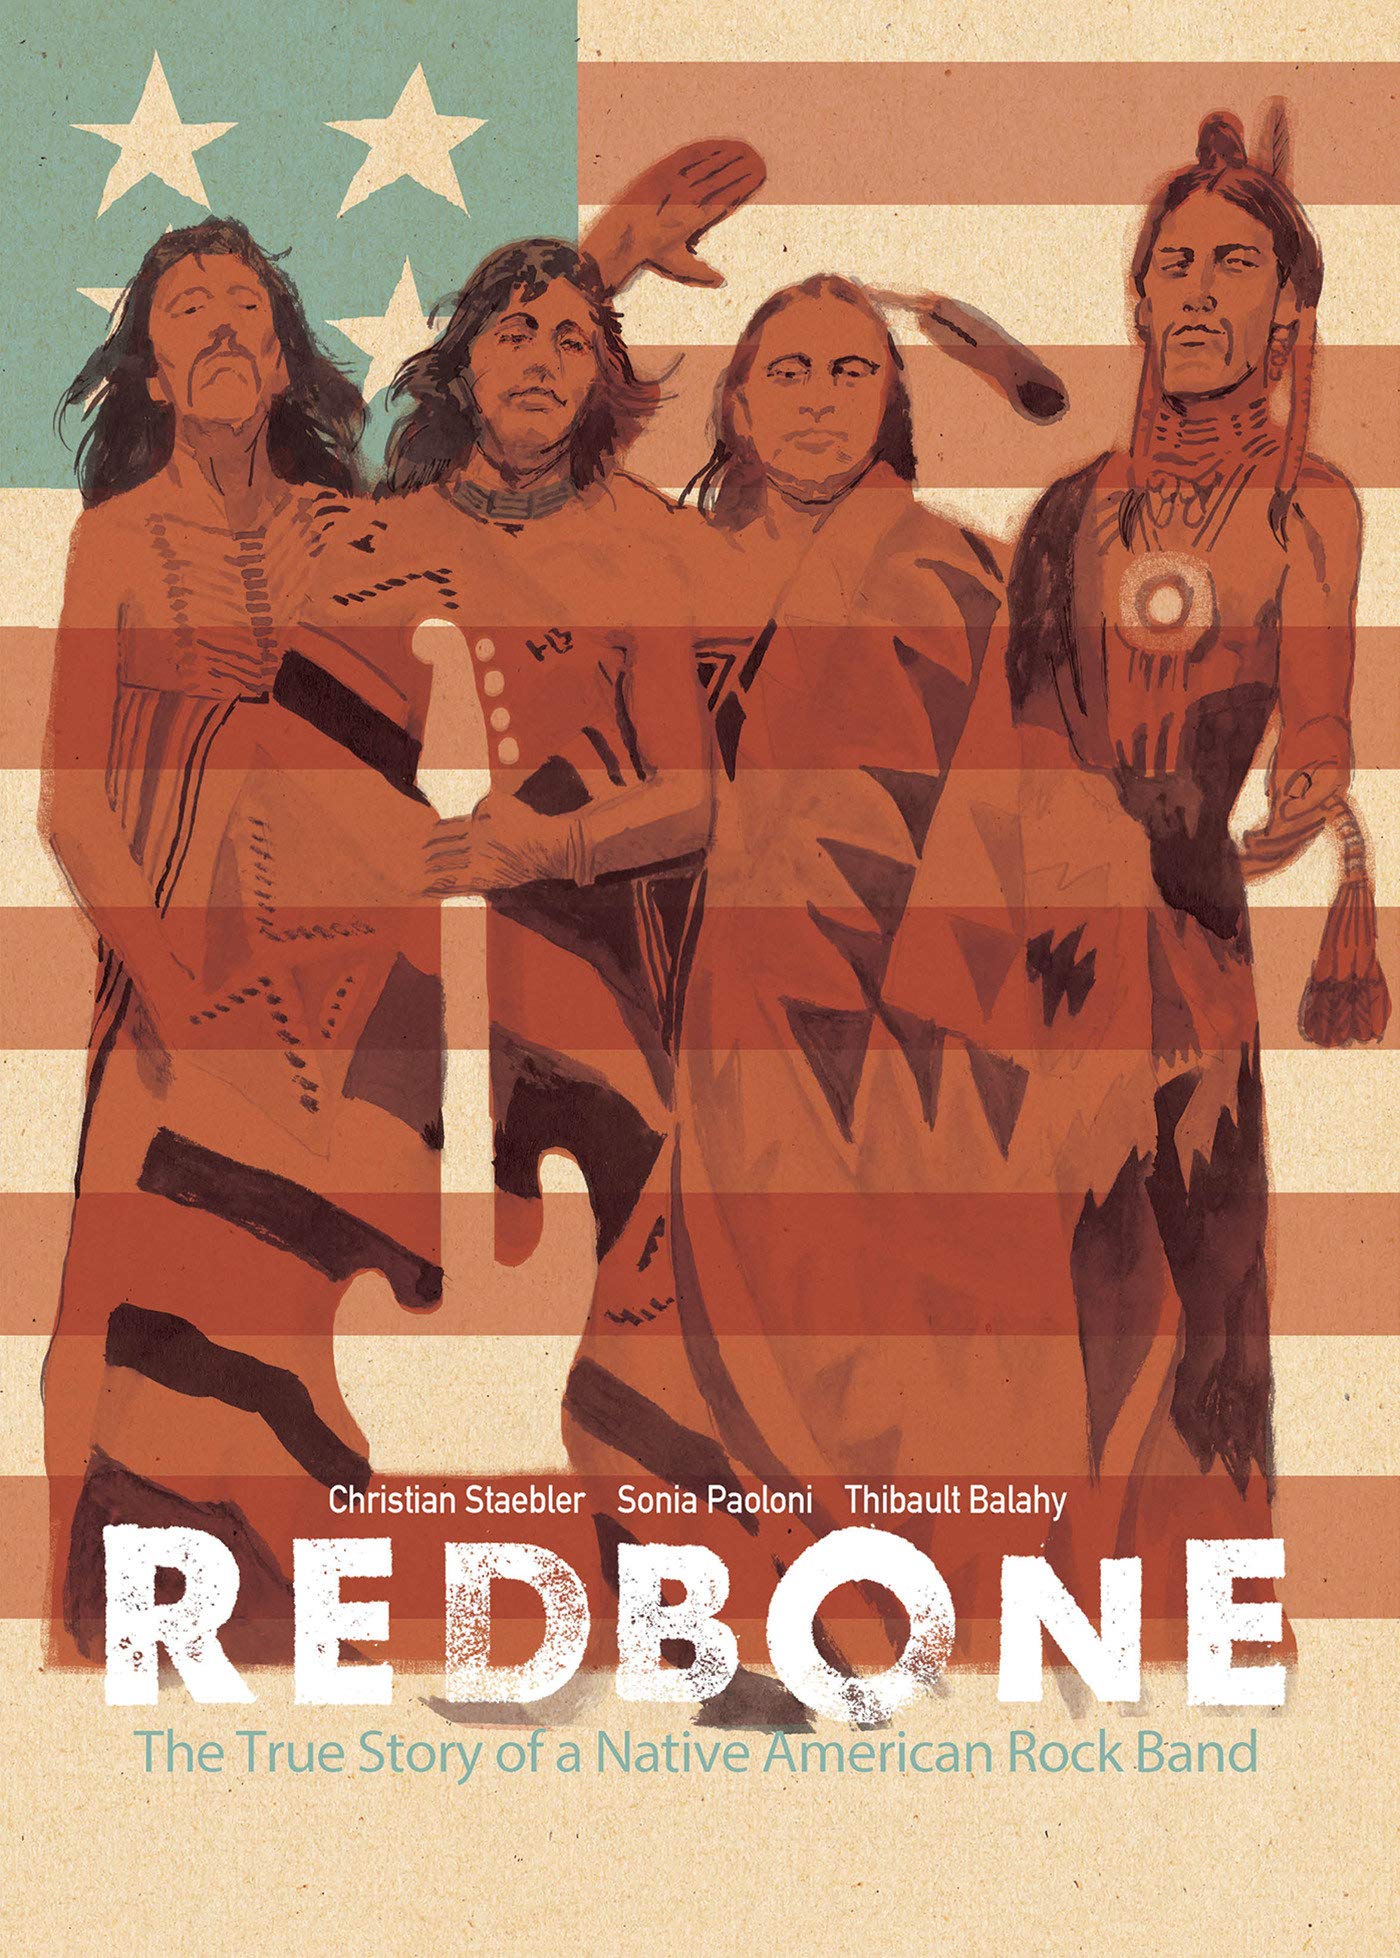 Cover image for "Redbone"